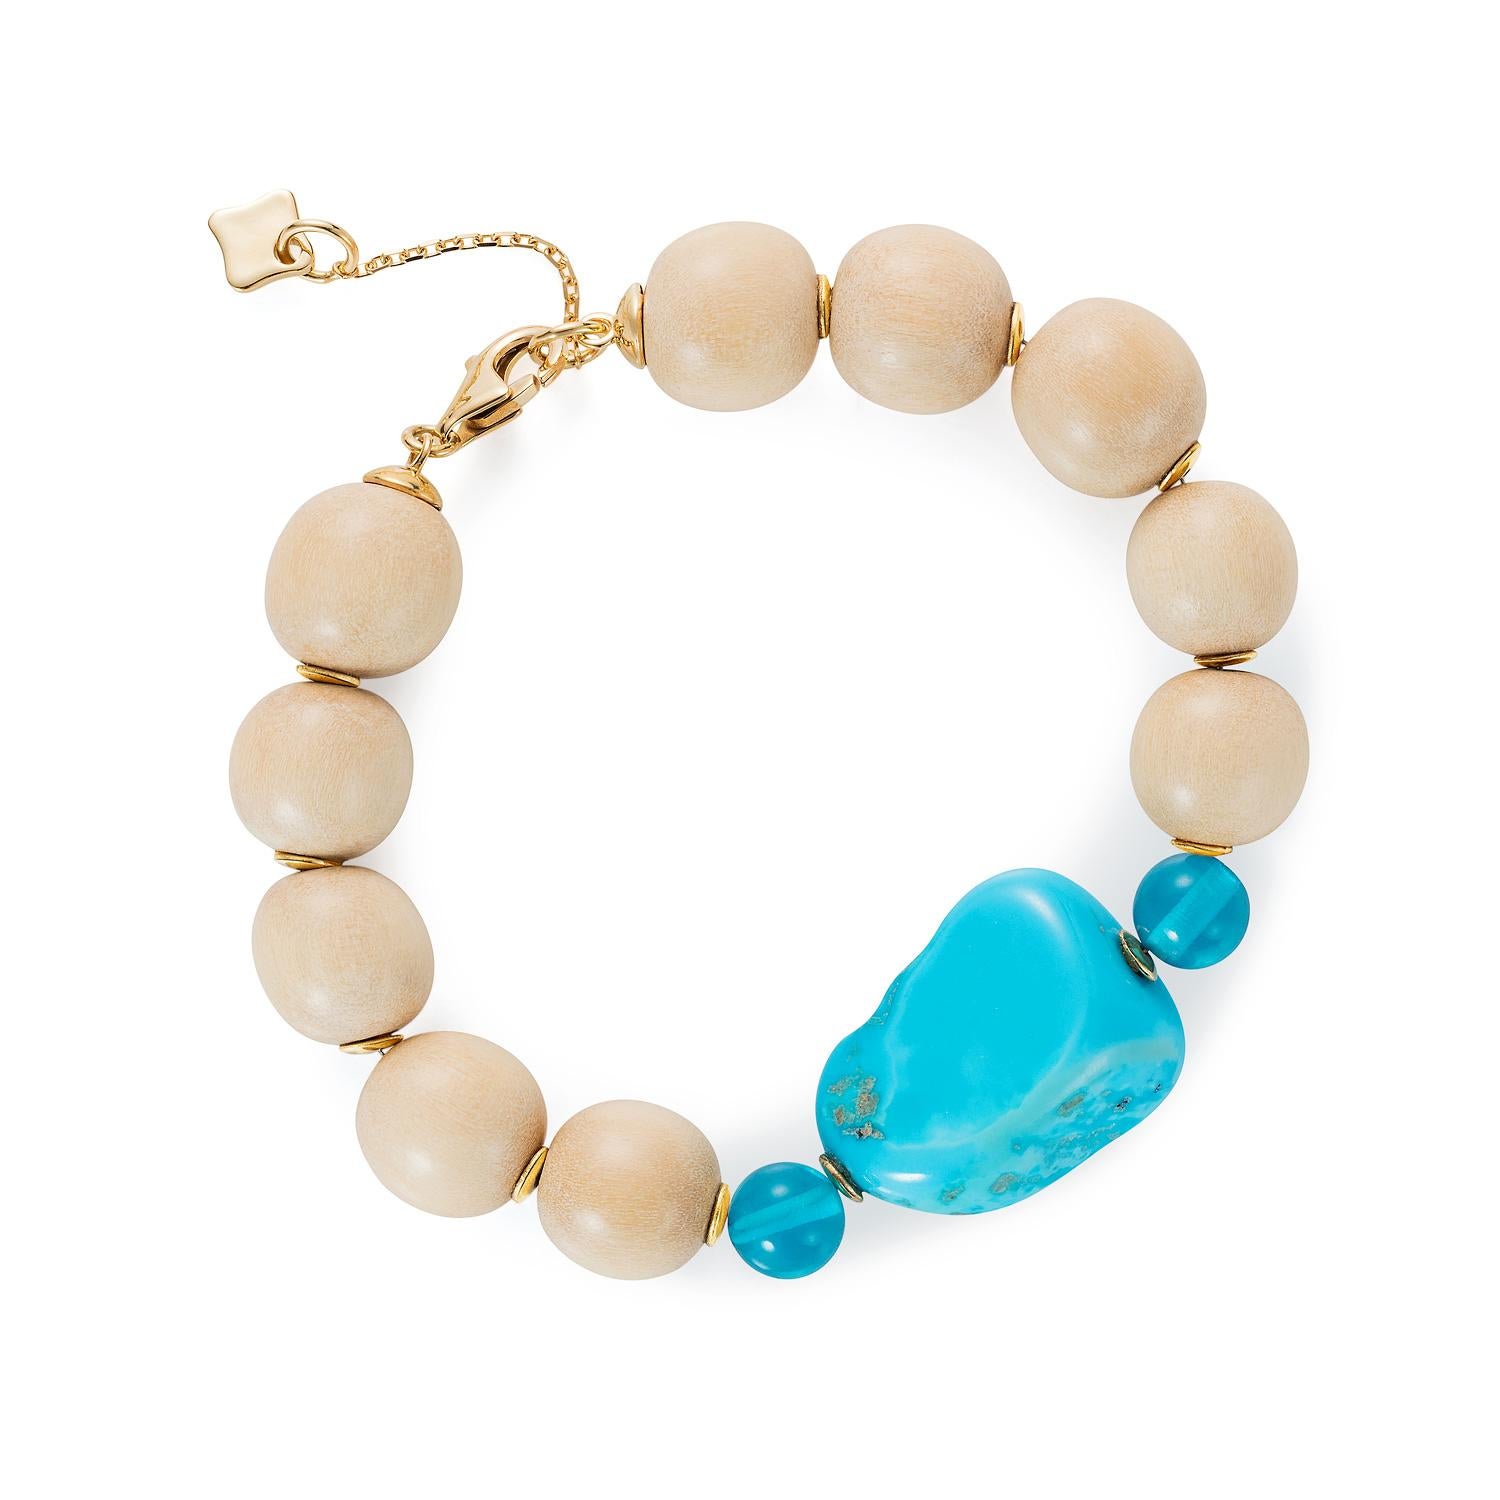 Our Wooden Bracelet Series are meant to be worn layered, showing all the wonderful gemstones, whether they be Turquoise, Baroque Pearls and our colourful gemstones of exceptional quality.

The Turquoise bracelet compromises turquoise stones that are